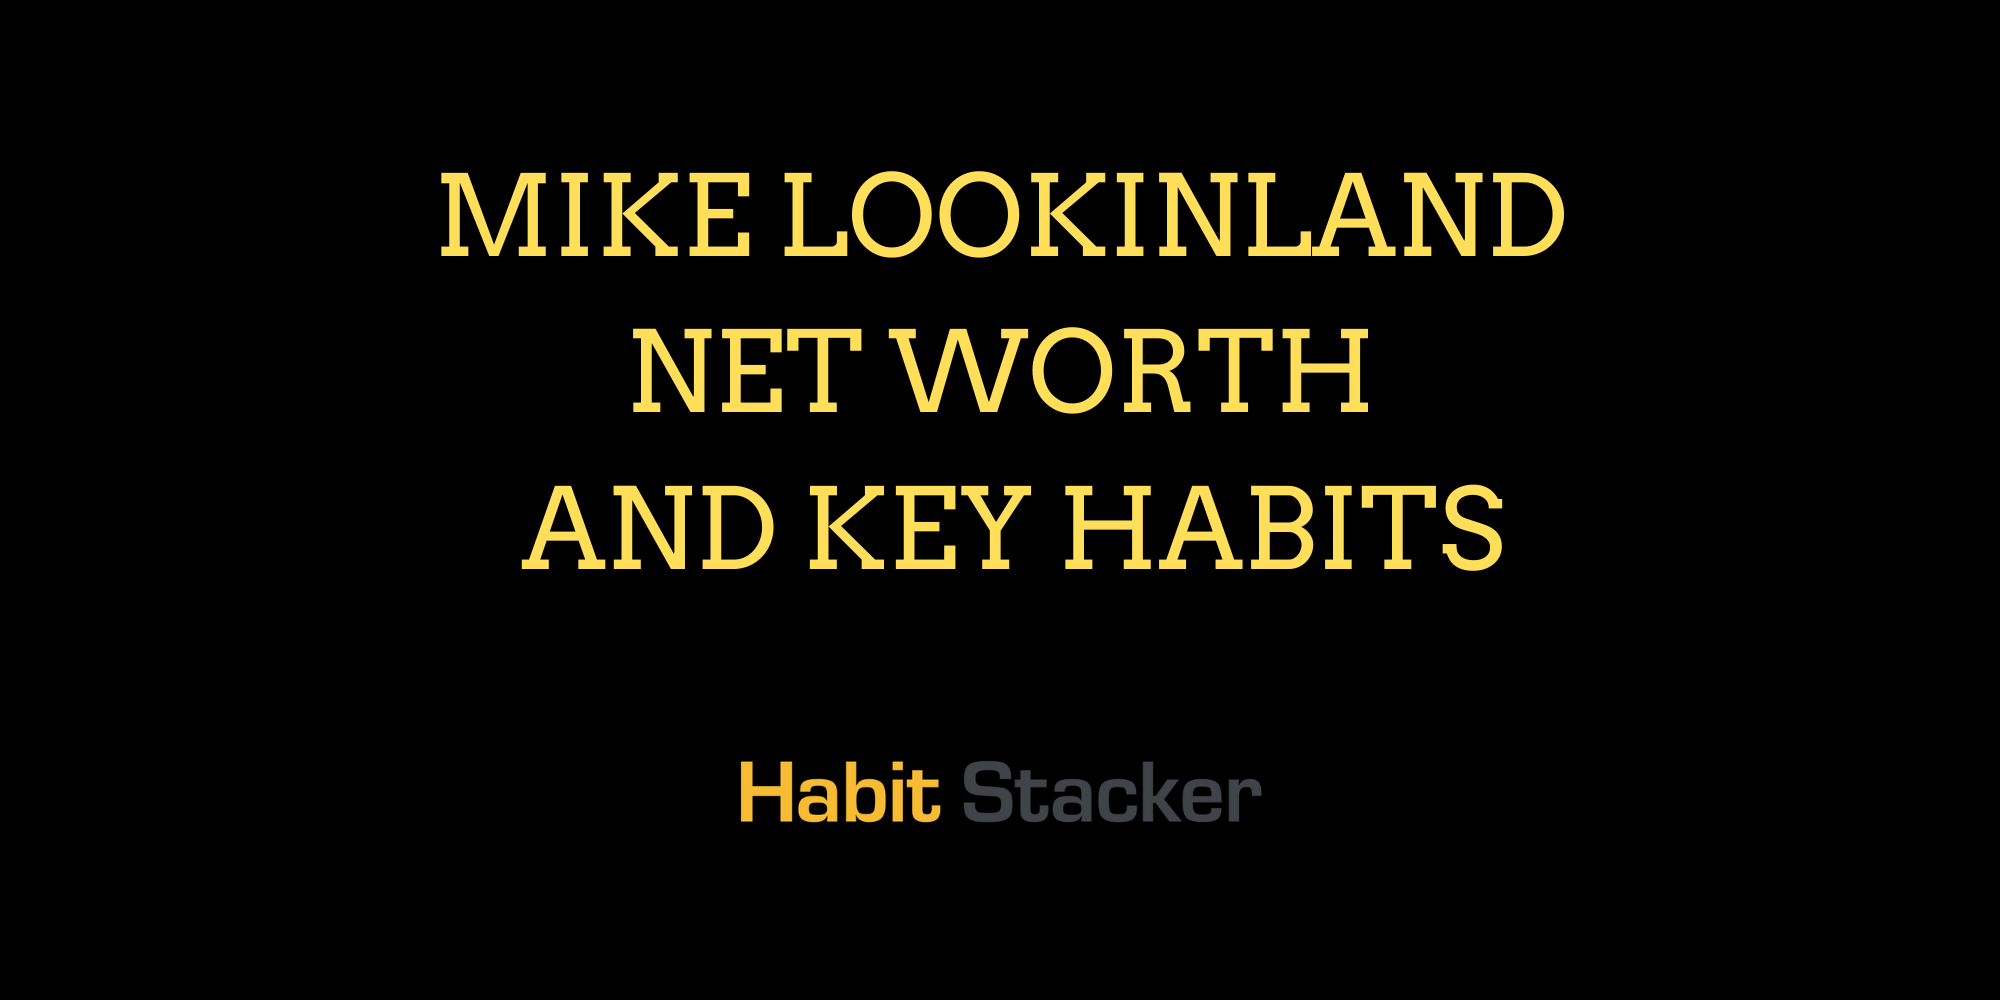 Mike Lookinland Net Worth And Key Habits